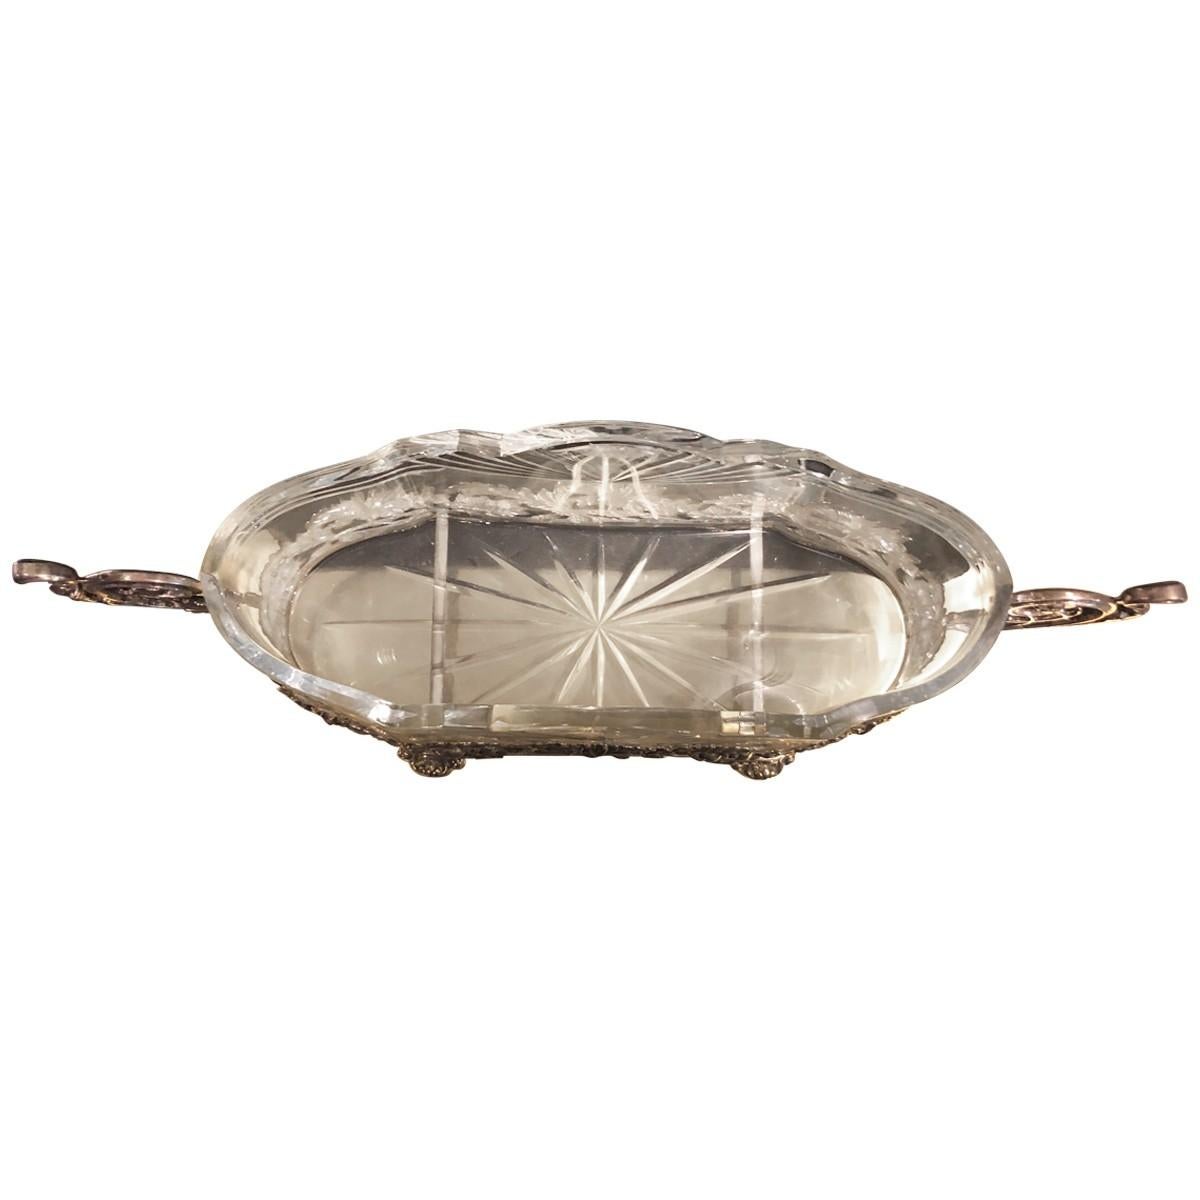 Italian Antique Sterling Silver Repoussé Centrepiece, Early 20th Century